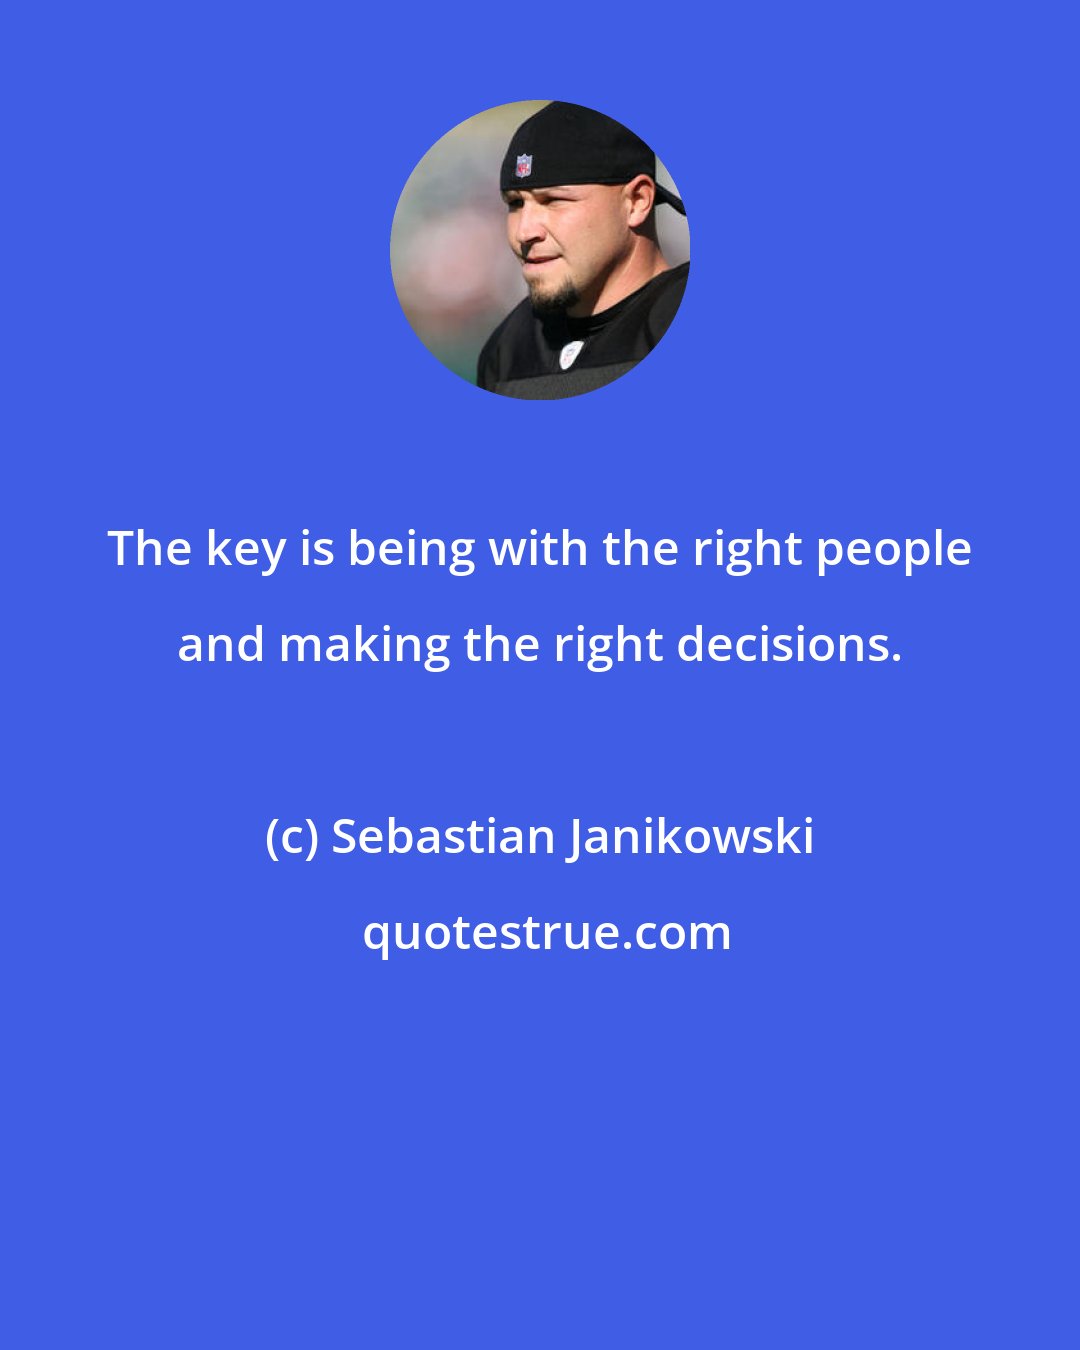 Sebastian Janikowski: The key is being with the right people and making the right decisions.